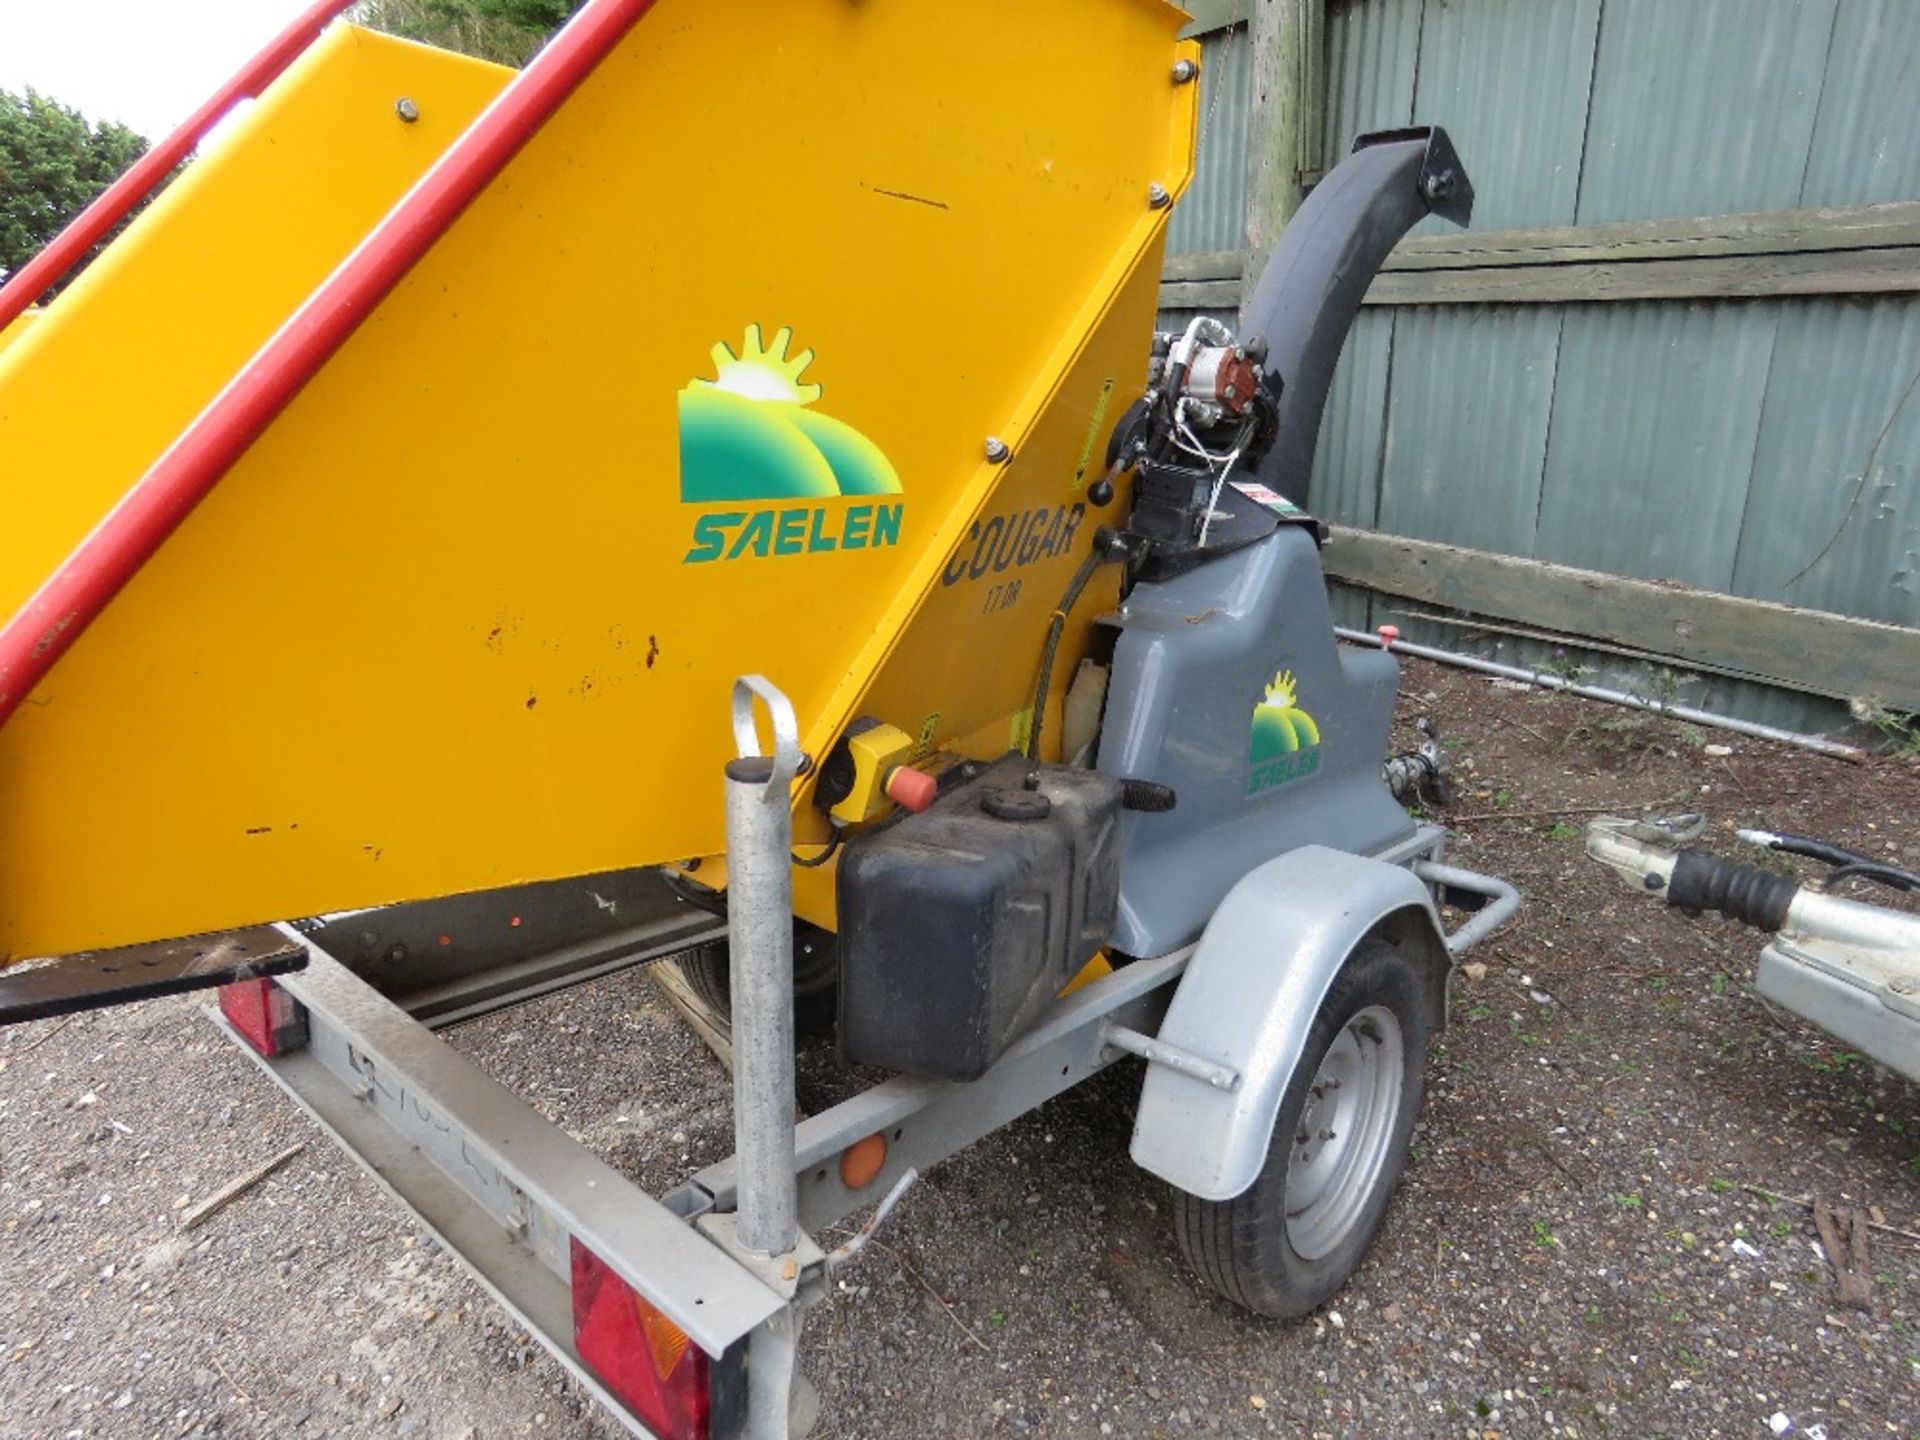 SAELEN COUGAR DR17 EVO DIESEL ENGINED CHIPPER, YEAR 2011. 251 REC HOURS. SN:11101. WHEN TESTED WAS S - Image 3 of 7